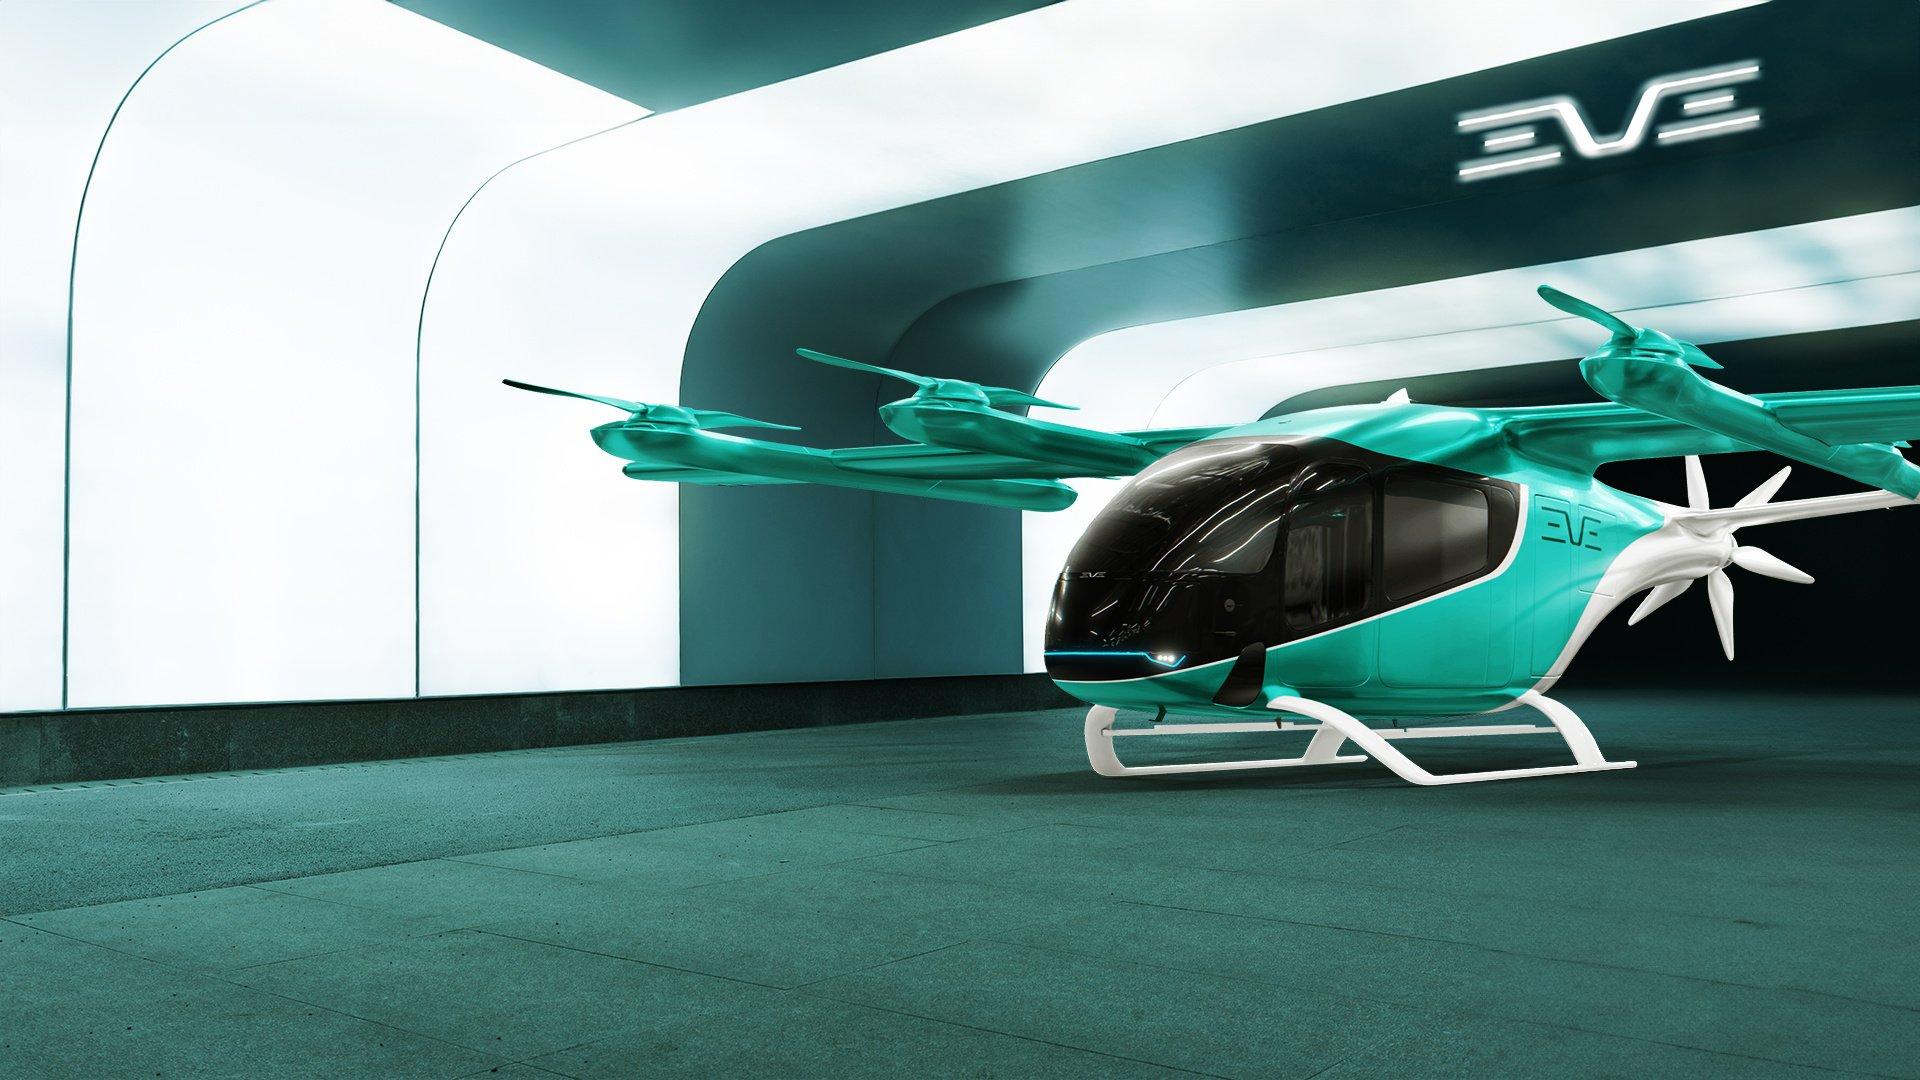 Eve Names Suppliers for eVTOL Sensors, Guidance and Navigation, Seats and Flight Controls